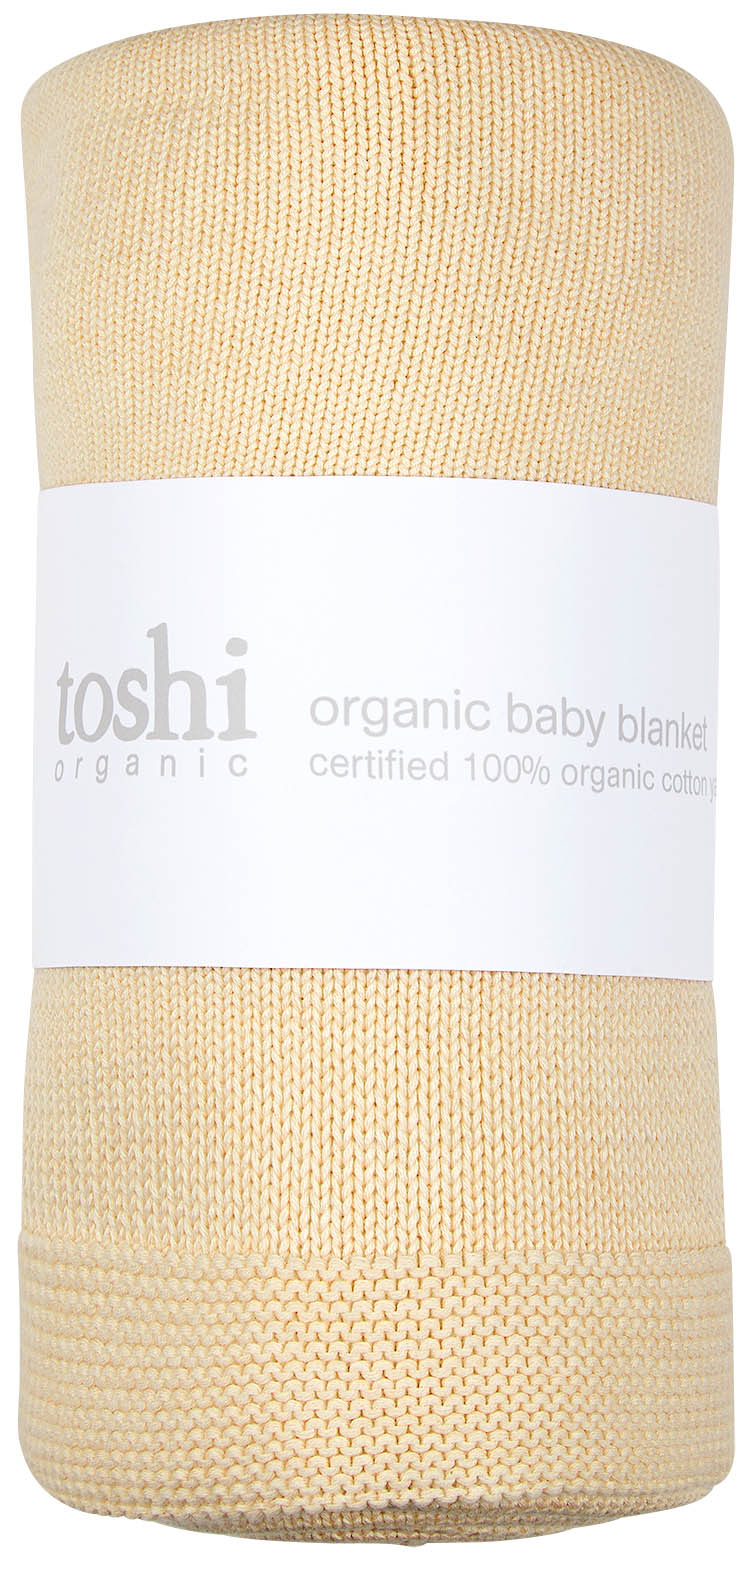 Toshi Organic Blanket Bowie - Driftwood